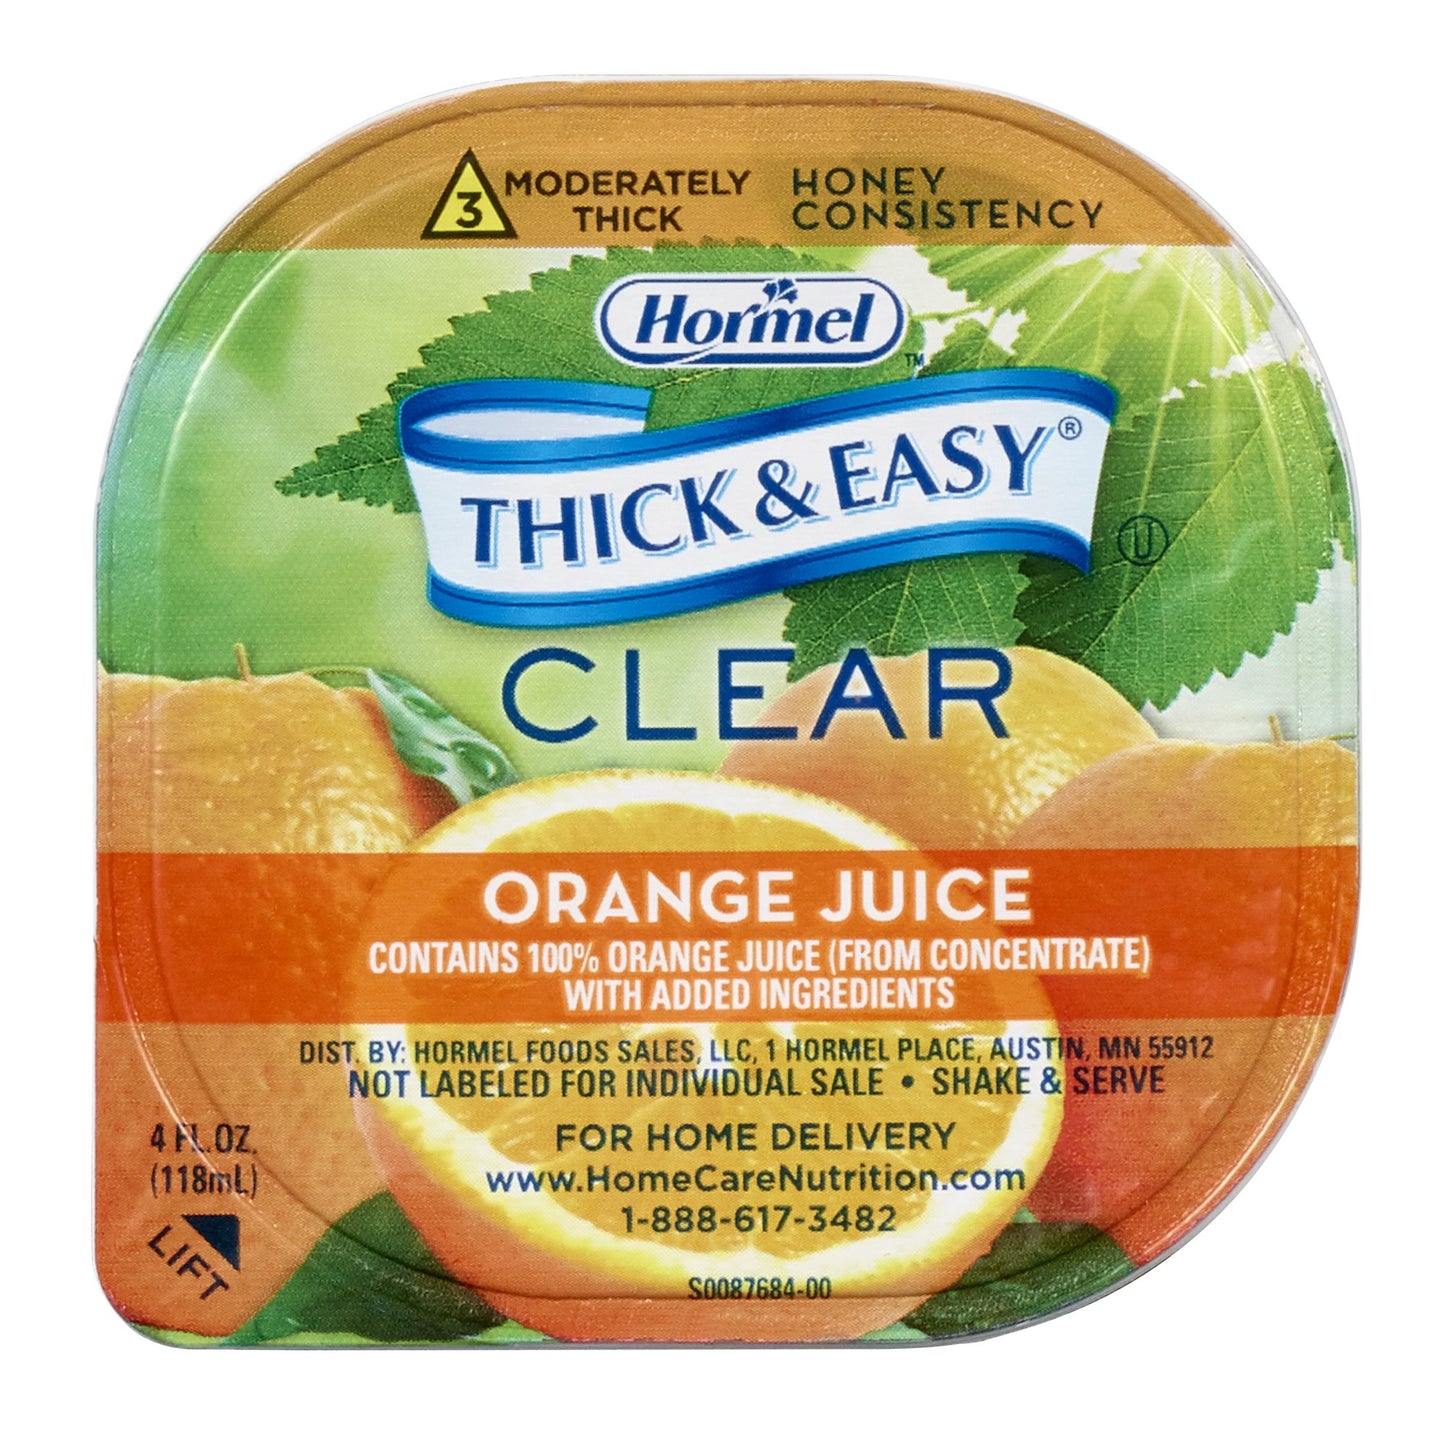 Thick & Easy Clear Honey Consistency Orange Juice Thickened Beverage, 4 oz. Cup